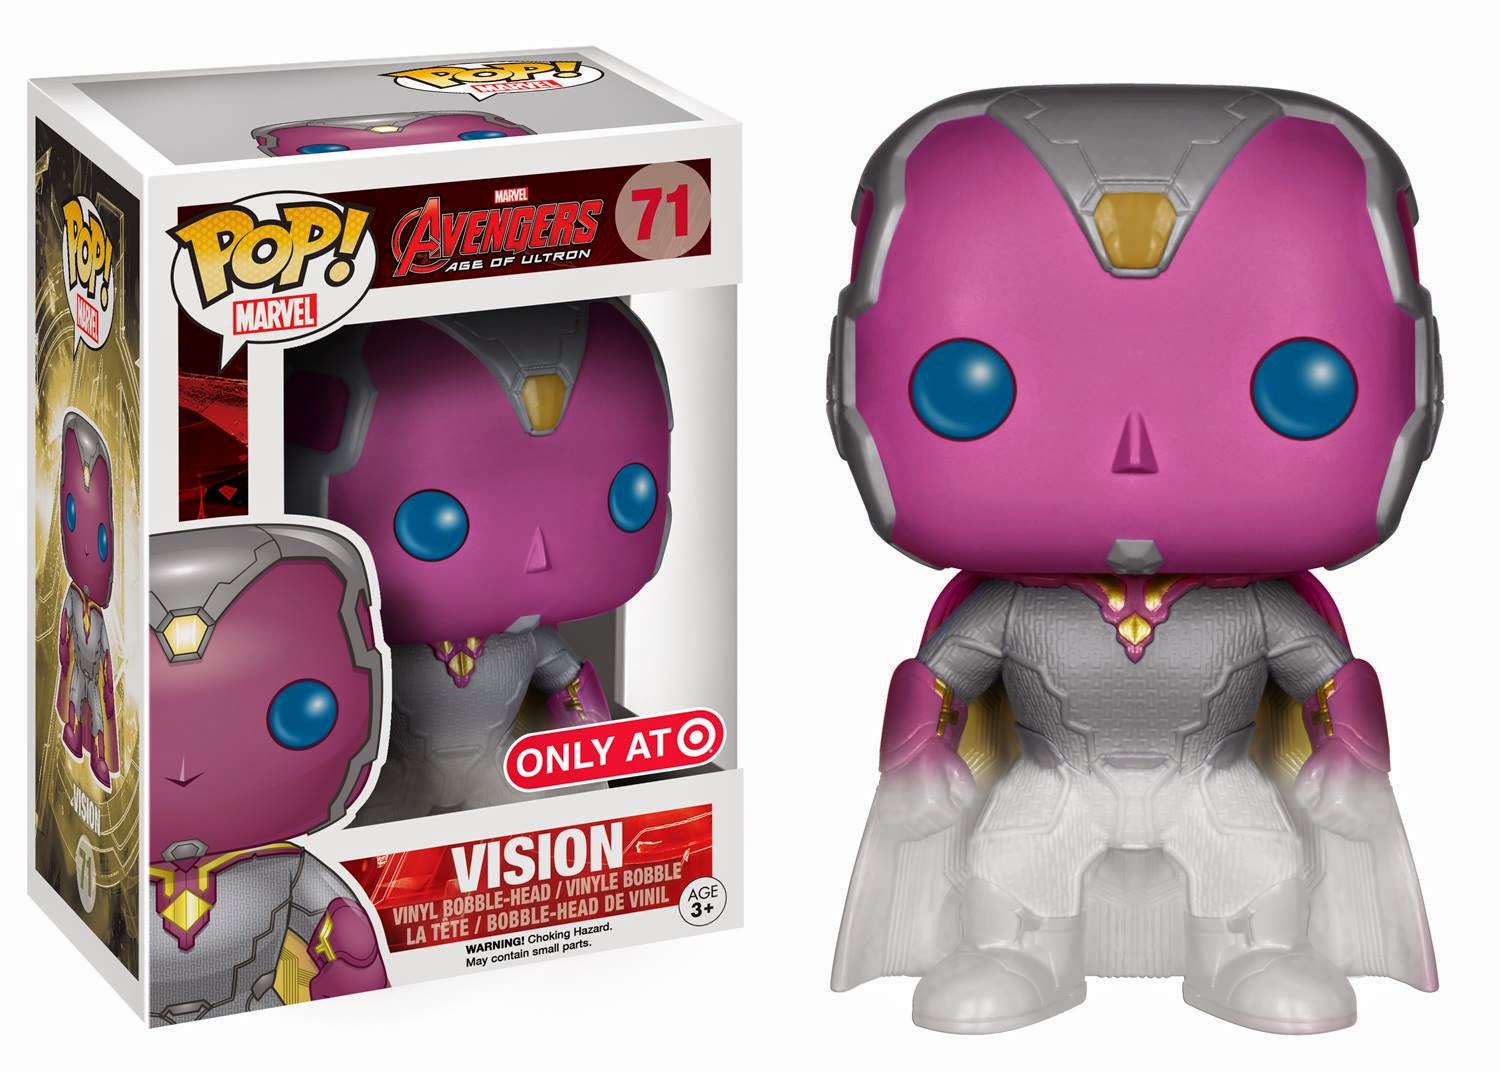 Target Exclusive “Faded” Vision Avengers: Age of Ultron Pop! Marvel Vinyl Figure by Funko